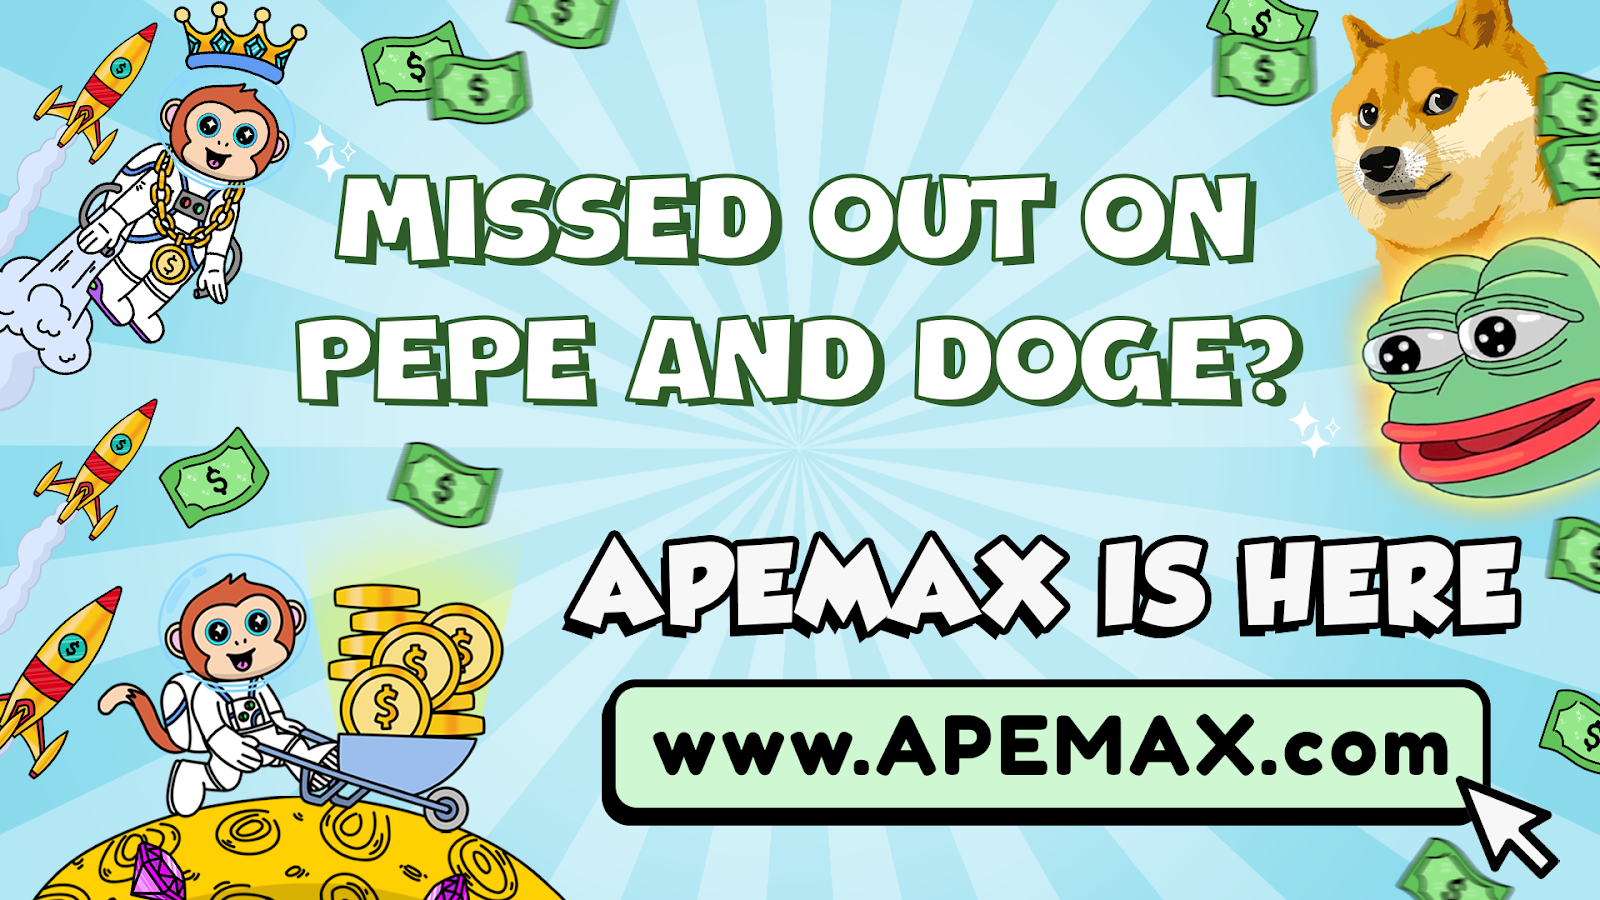 New Memecoins and Top Altcoins with Shiba Inu, Pepe Coin, Dogecoin and New Crypto Presale ApeMax